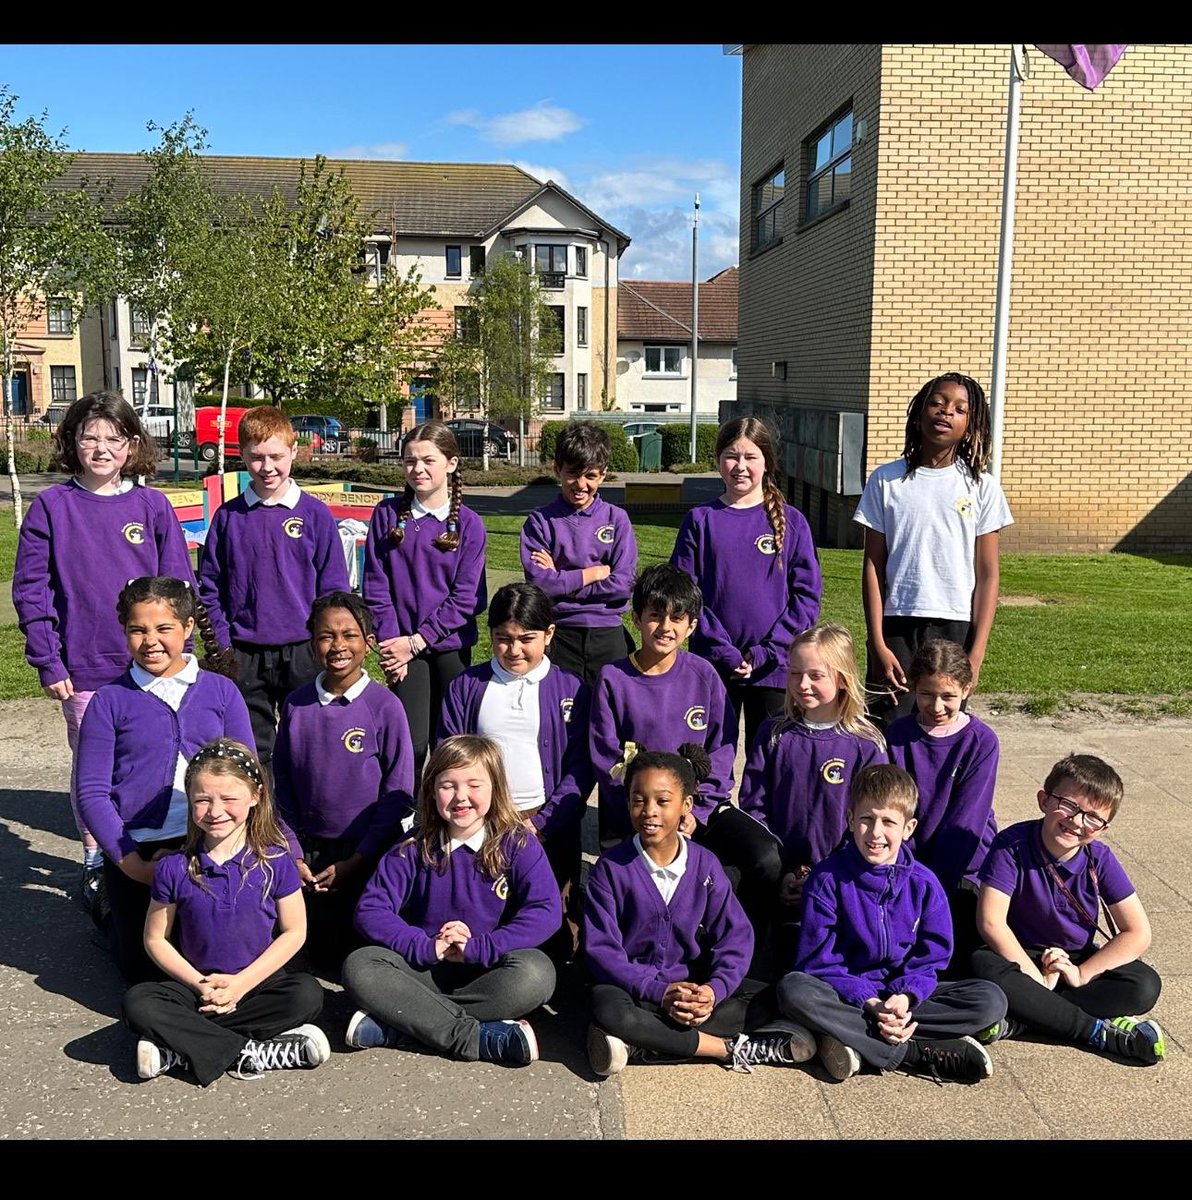 Our Junior Leadership Team members were announced at Assembly this afternoon. They will be ensuring that pupil voice is at the centre of all decision making for our school. We are very excited to be working with them @cv_doyle @Castleview_PS #pupilparticipation #pupilvoice